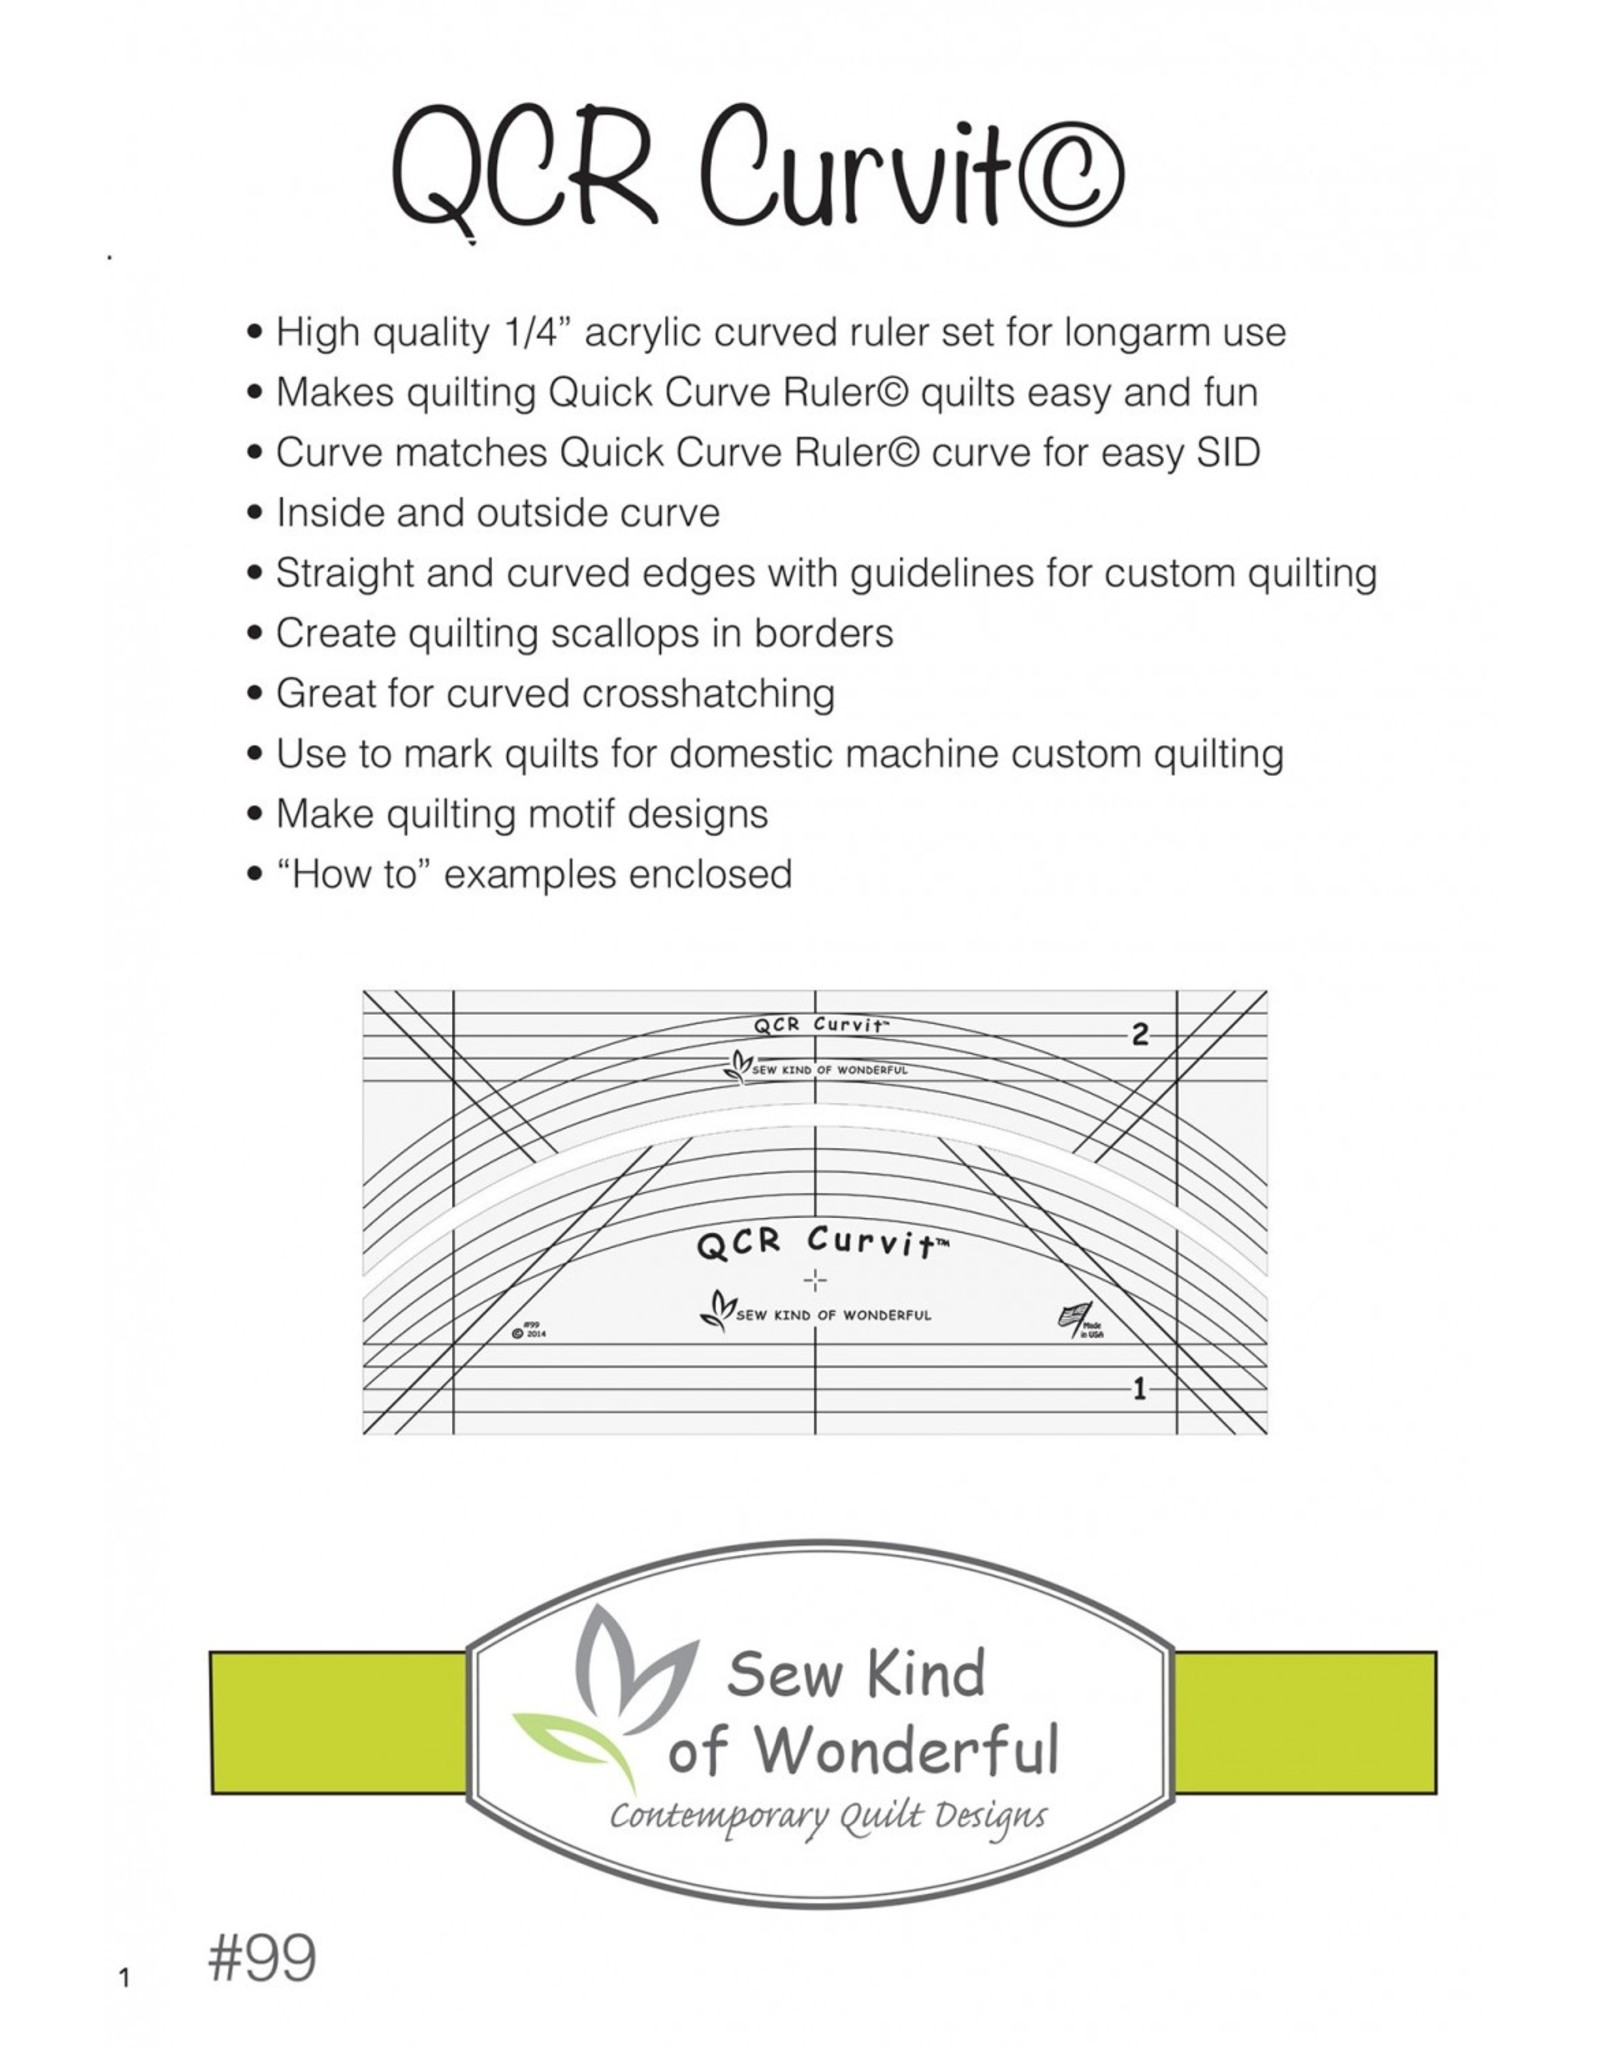 Sew Kind of Wonderful Sew Kind of Wonderful - Curvit - Quilting Template